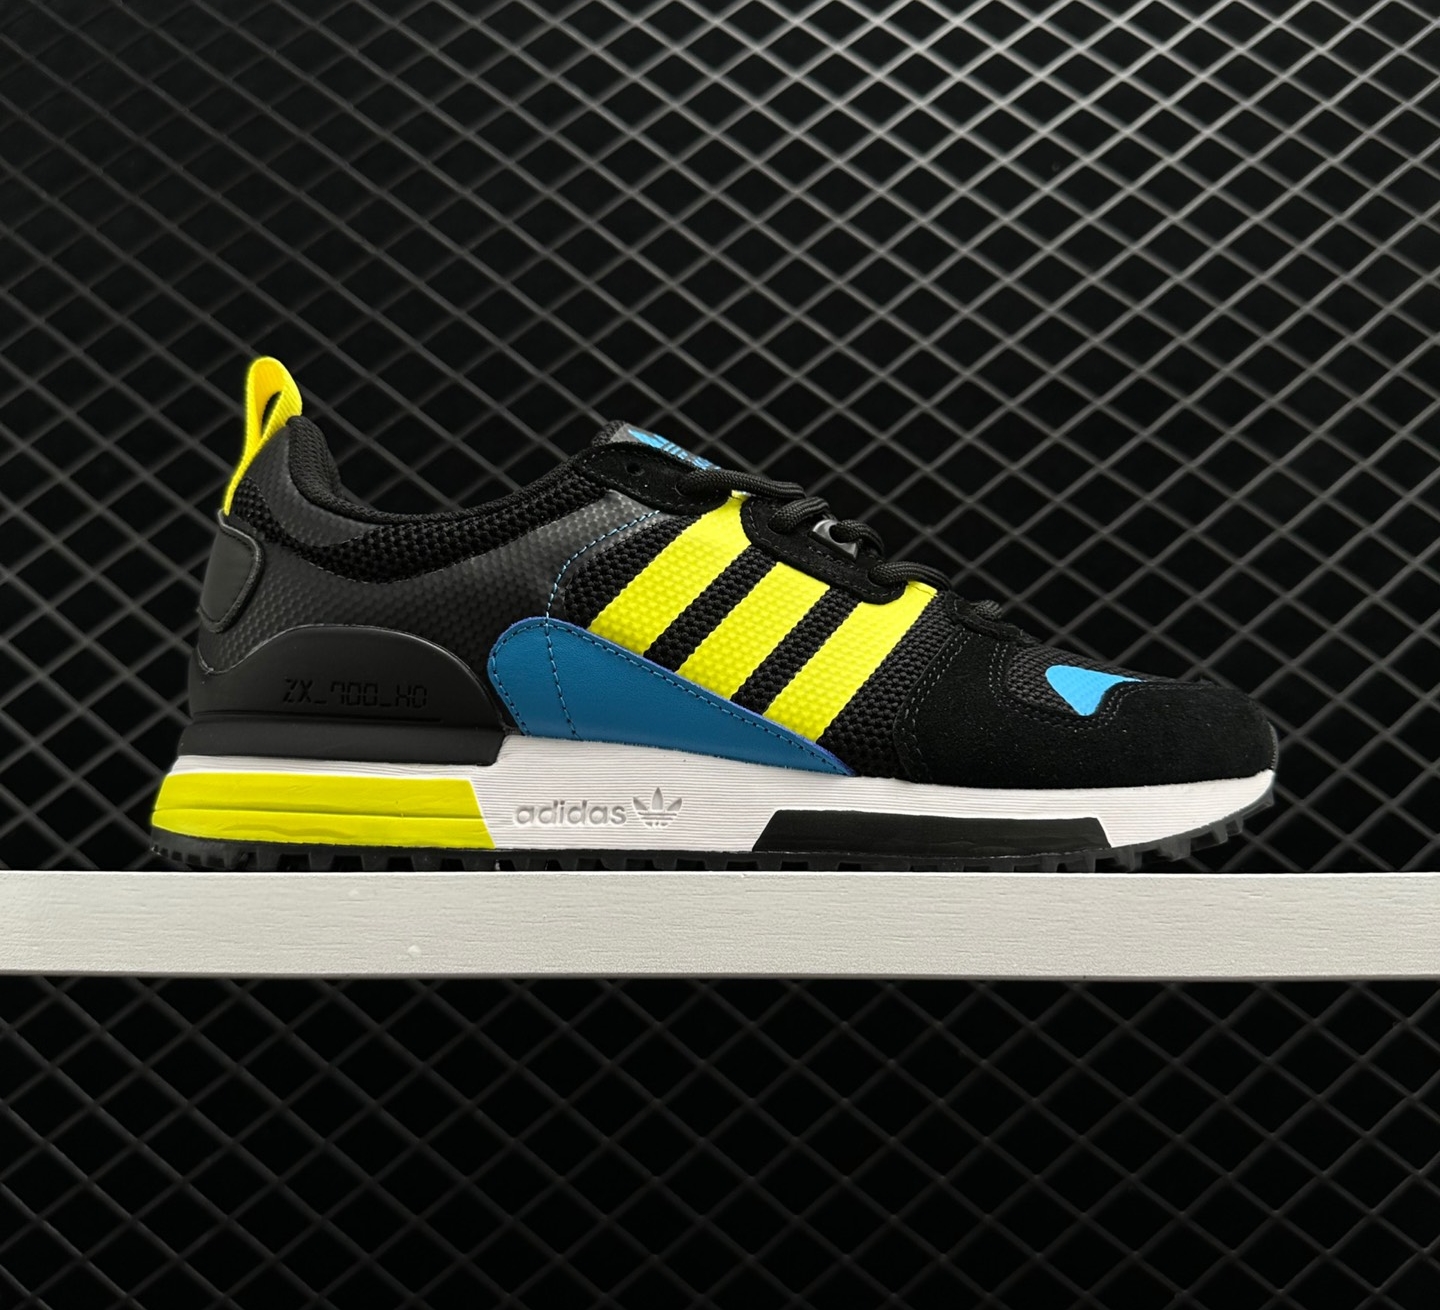 ADIDAS ORIGINALS ZX 700 HD Casual Shoes: Style Meets Comfort